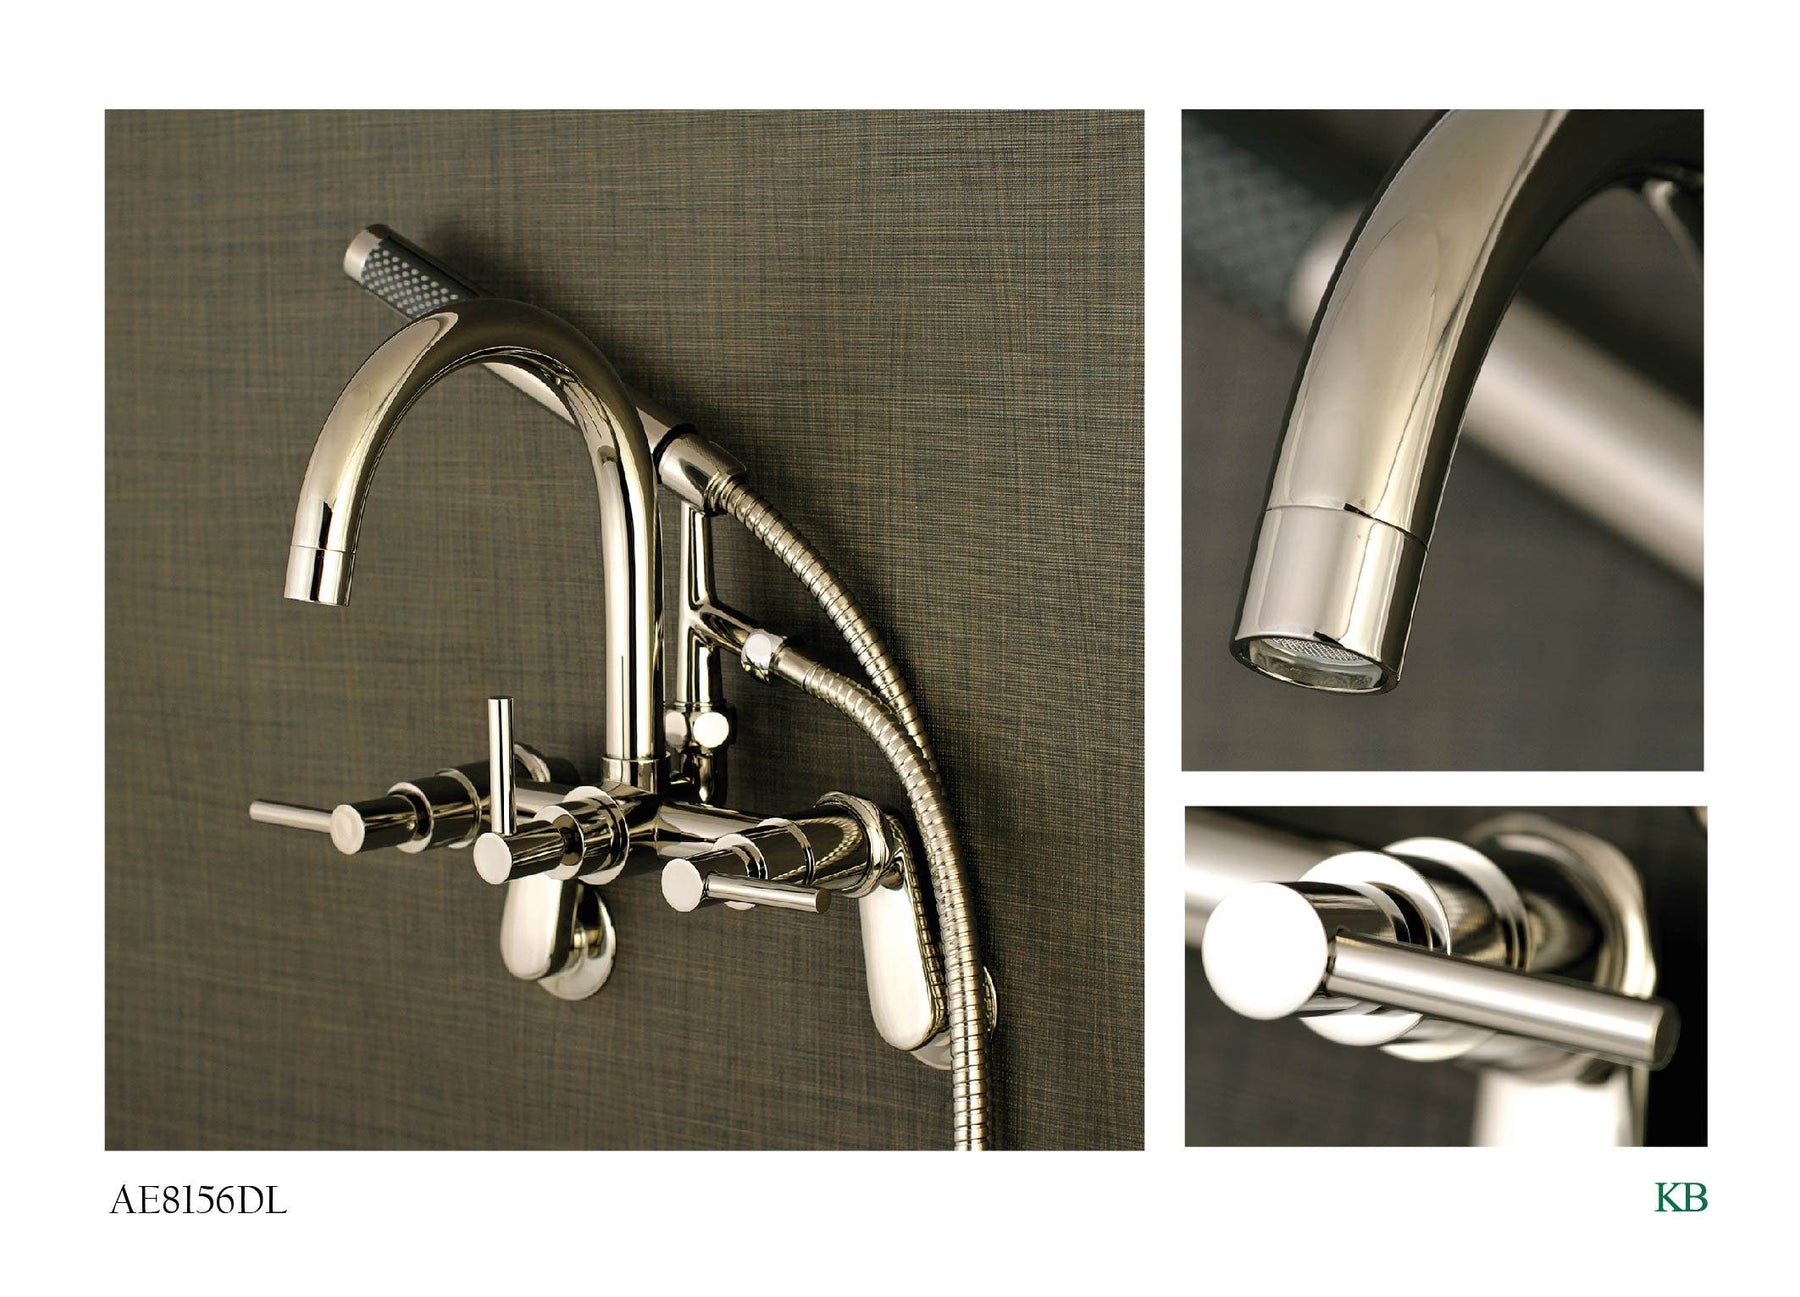 Rejuvenate Refreshing Style with the Bold Geometry of this Bathtub Faucet, AE8156DL